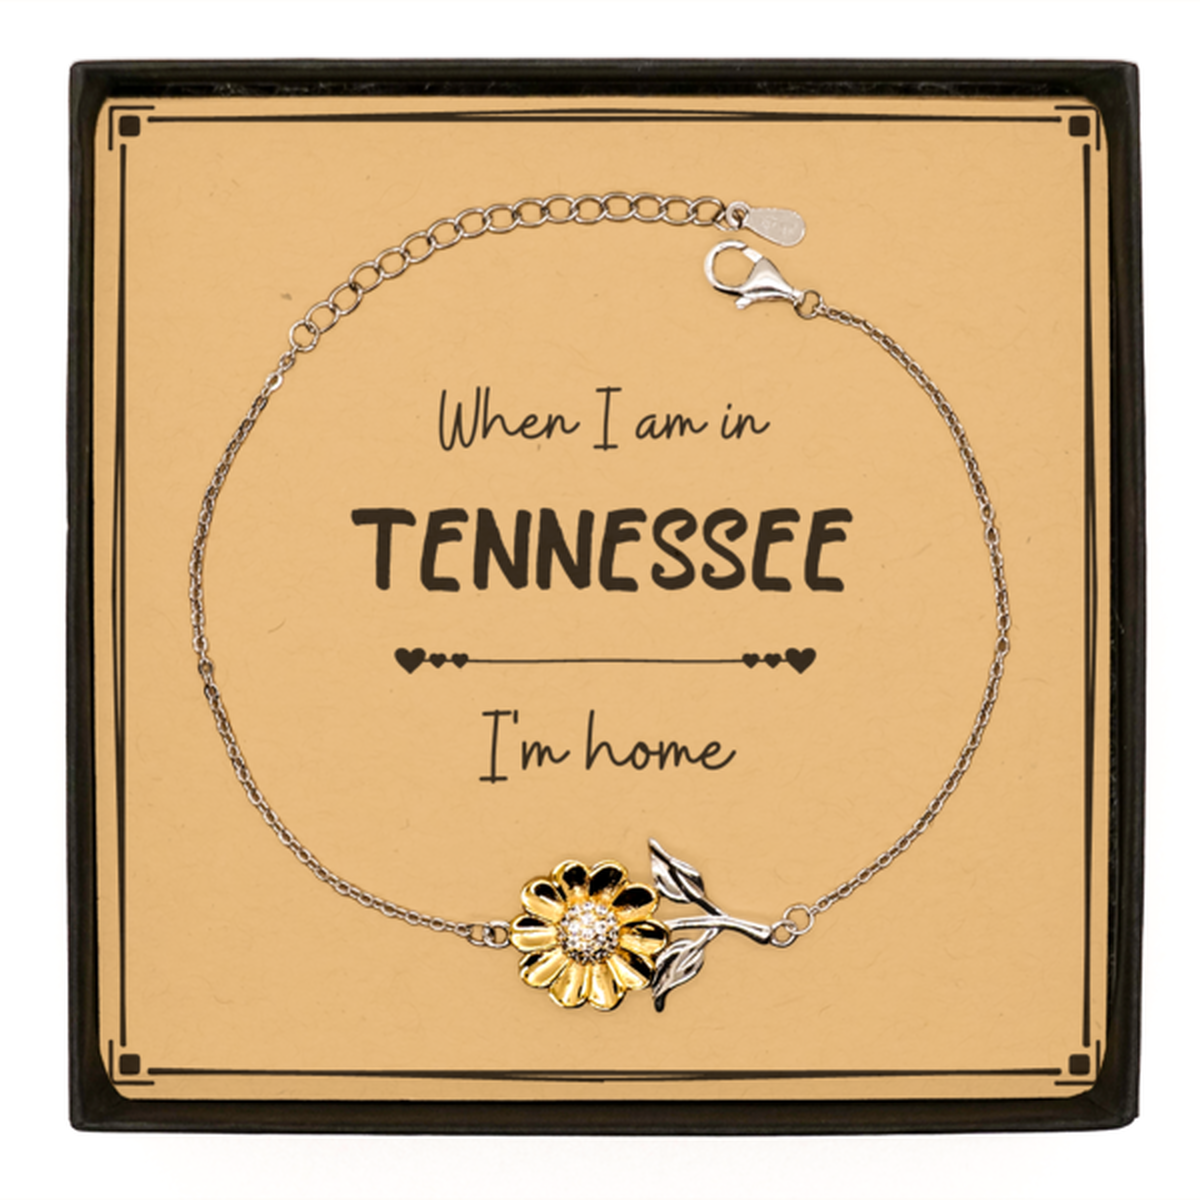 When I am in Tennessee I'm home Sunflower Bracelet, Message Card Gifts For Tennessee, State Tennessee Birthday Gifts for Friends Coworker